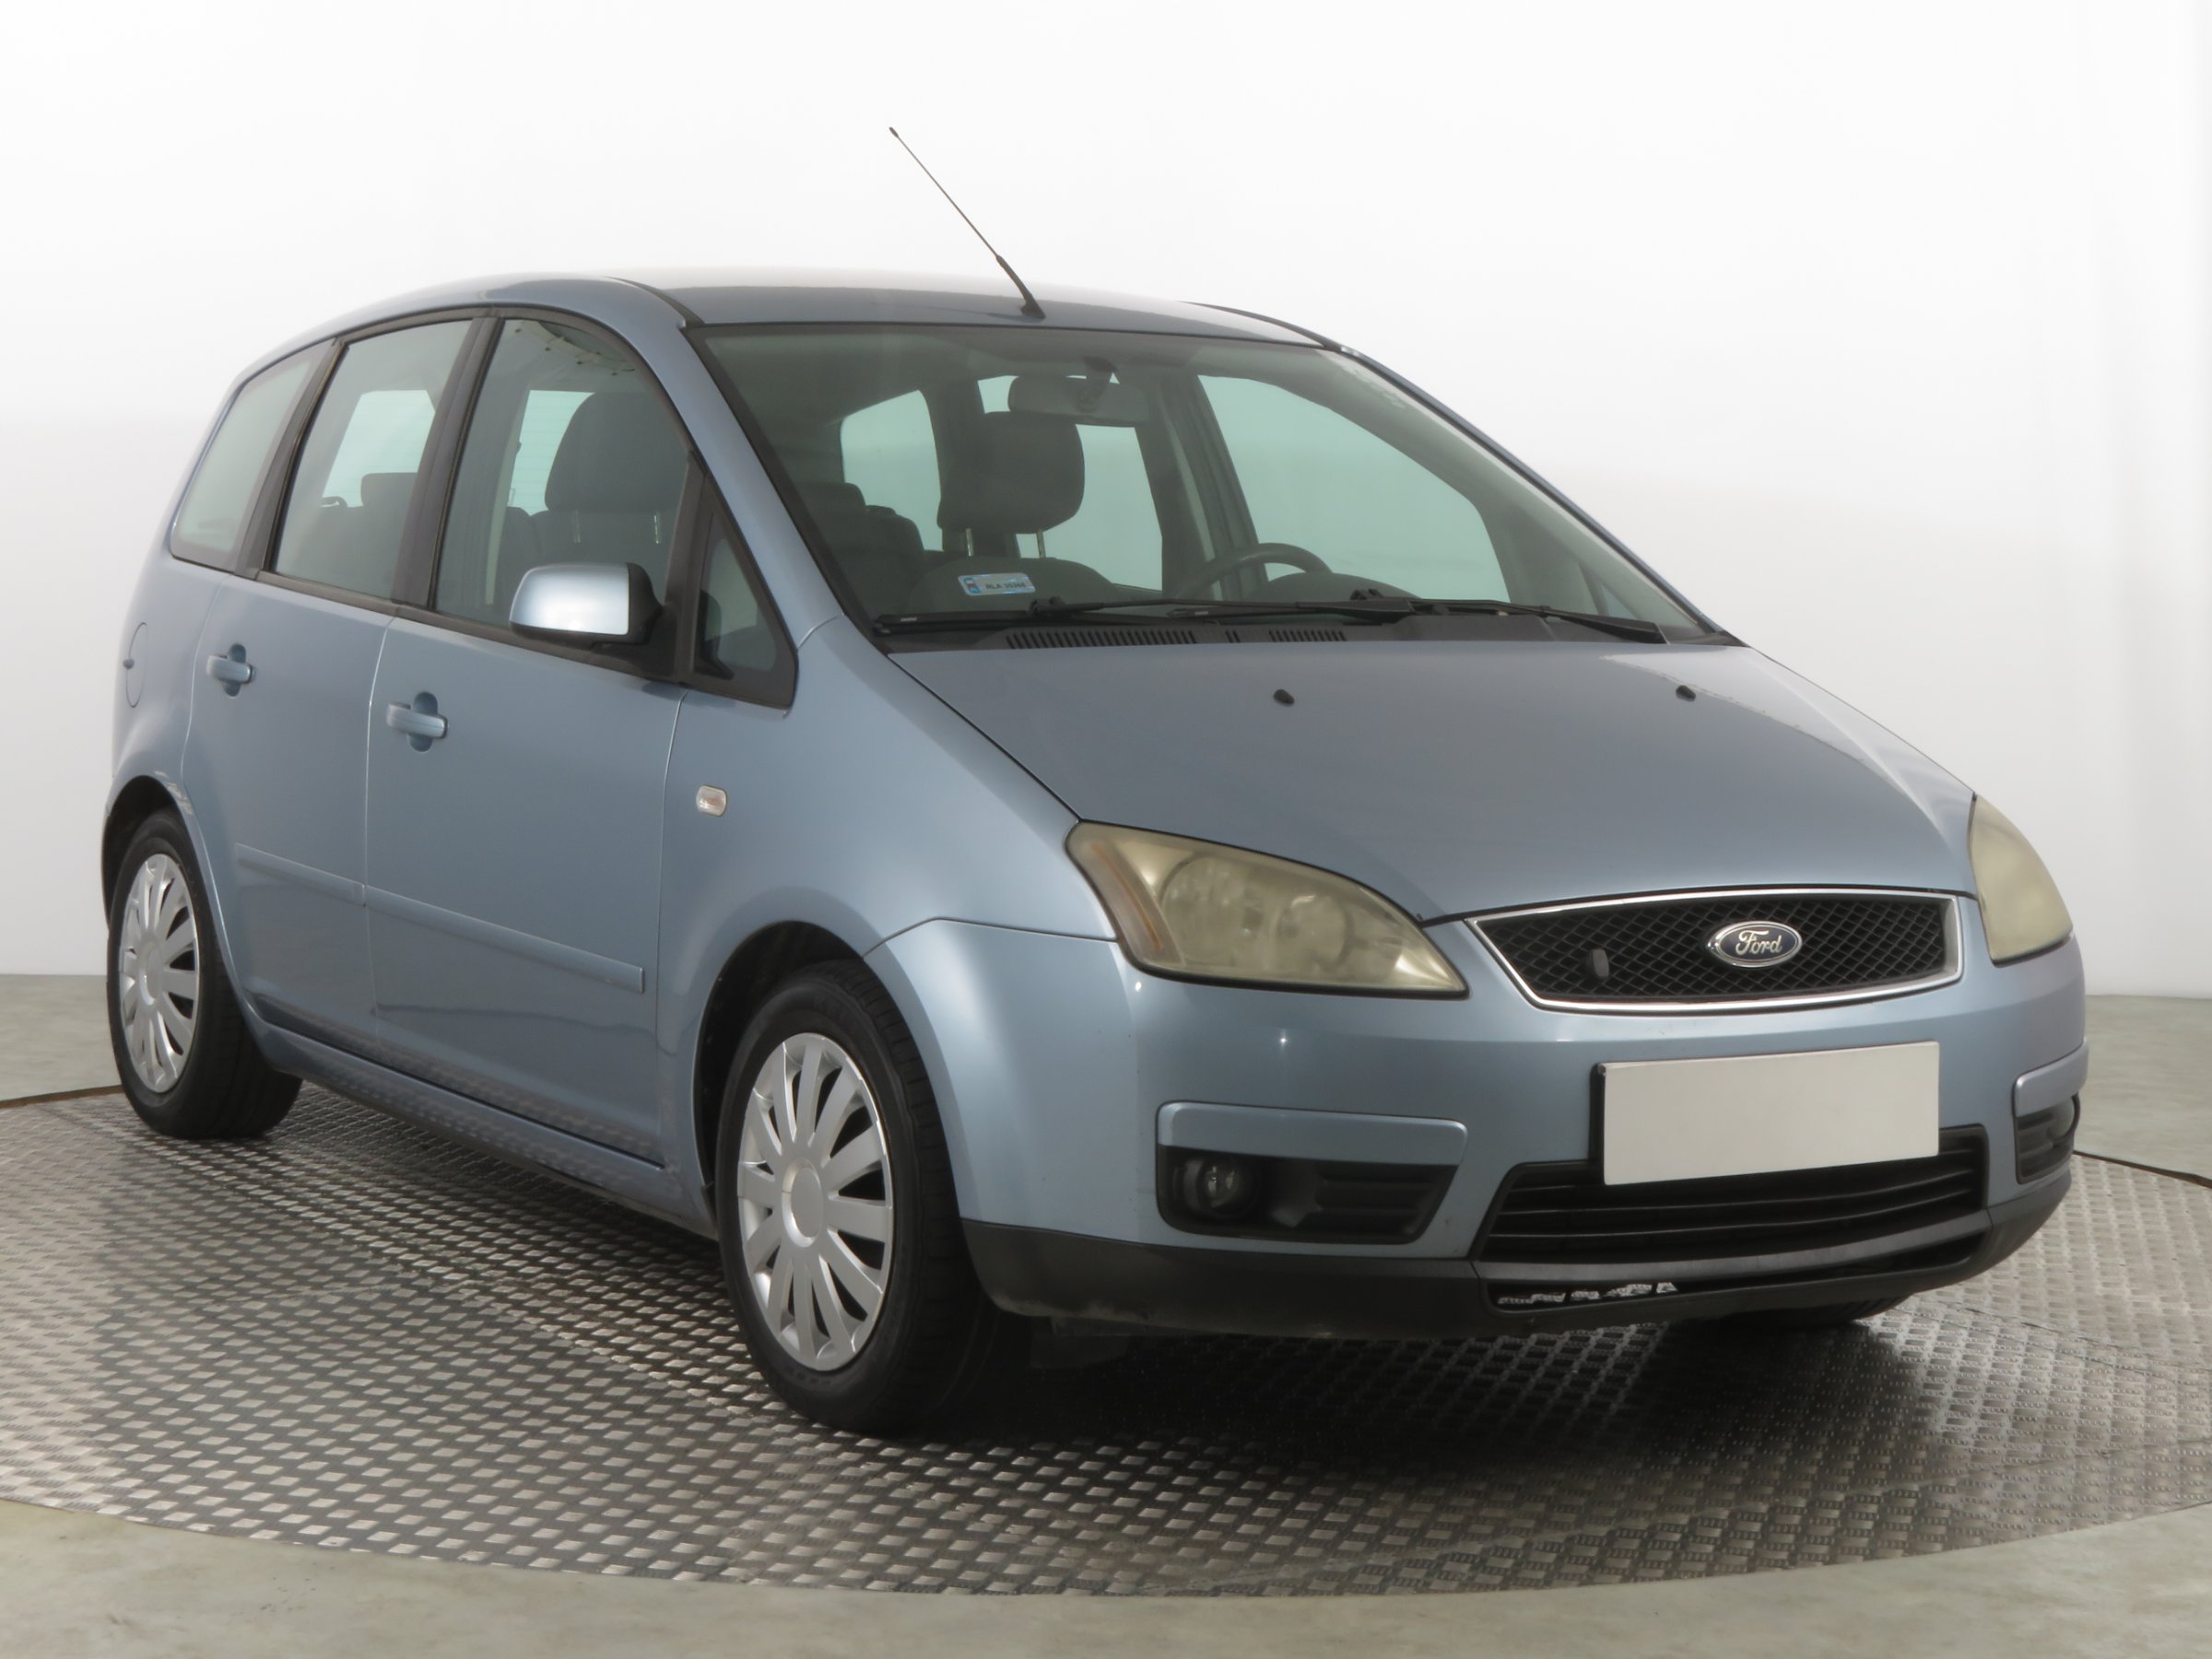 Ford C-Max 1.8 Duratec HE SUV 2006 - 1